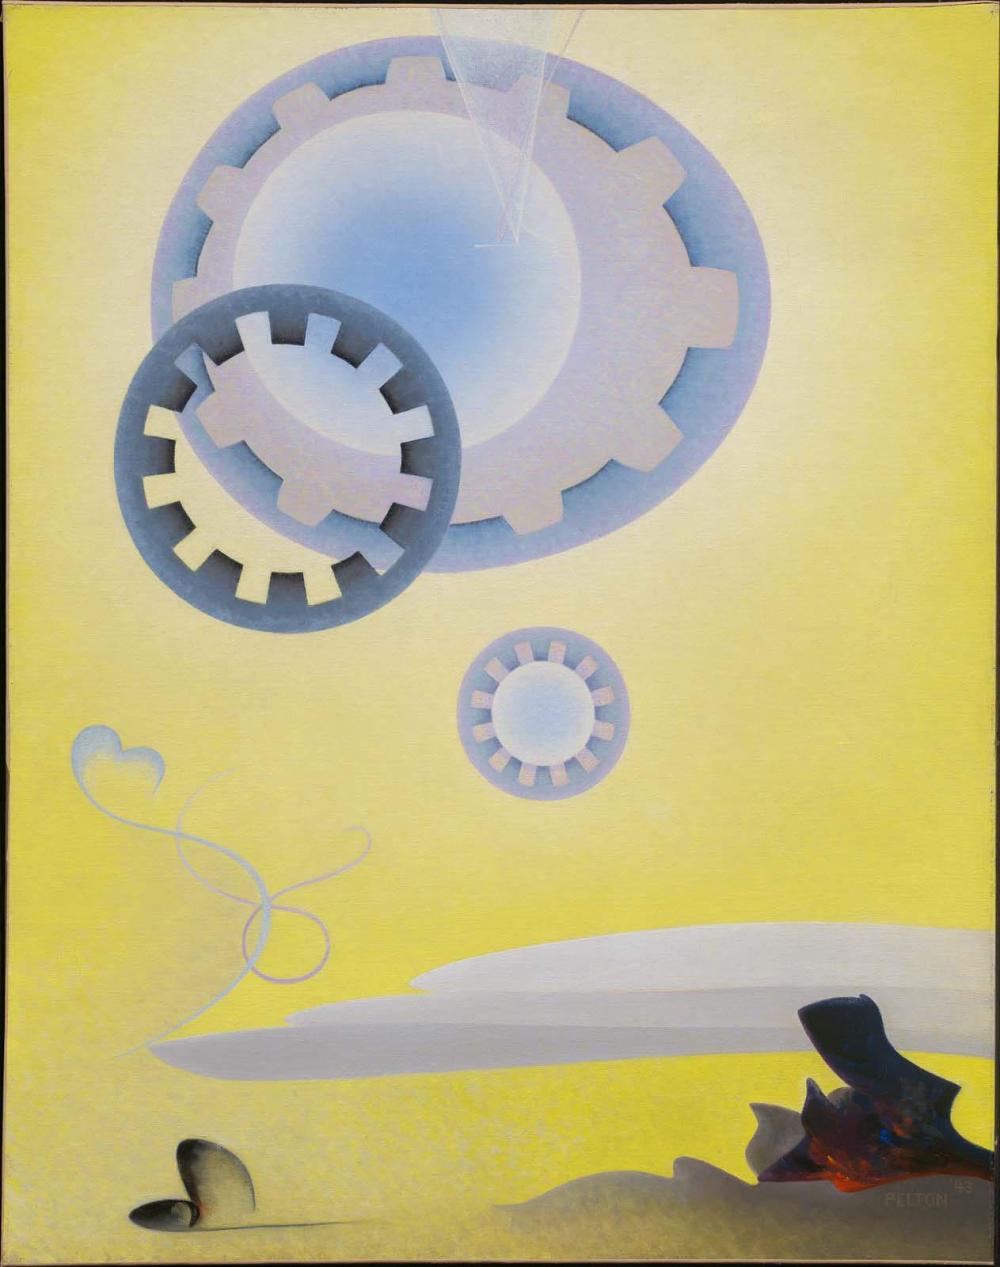 Painting of periwinkle gear-like circles above a white cloud and abstract mountain shapes below. Shapes silhouetted by chartreuse background